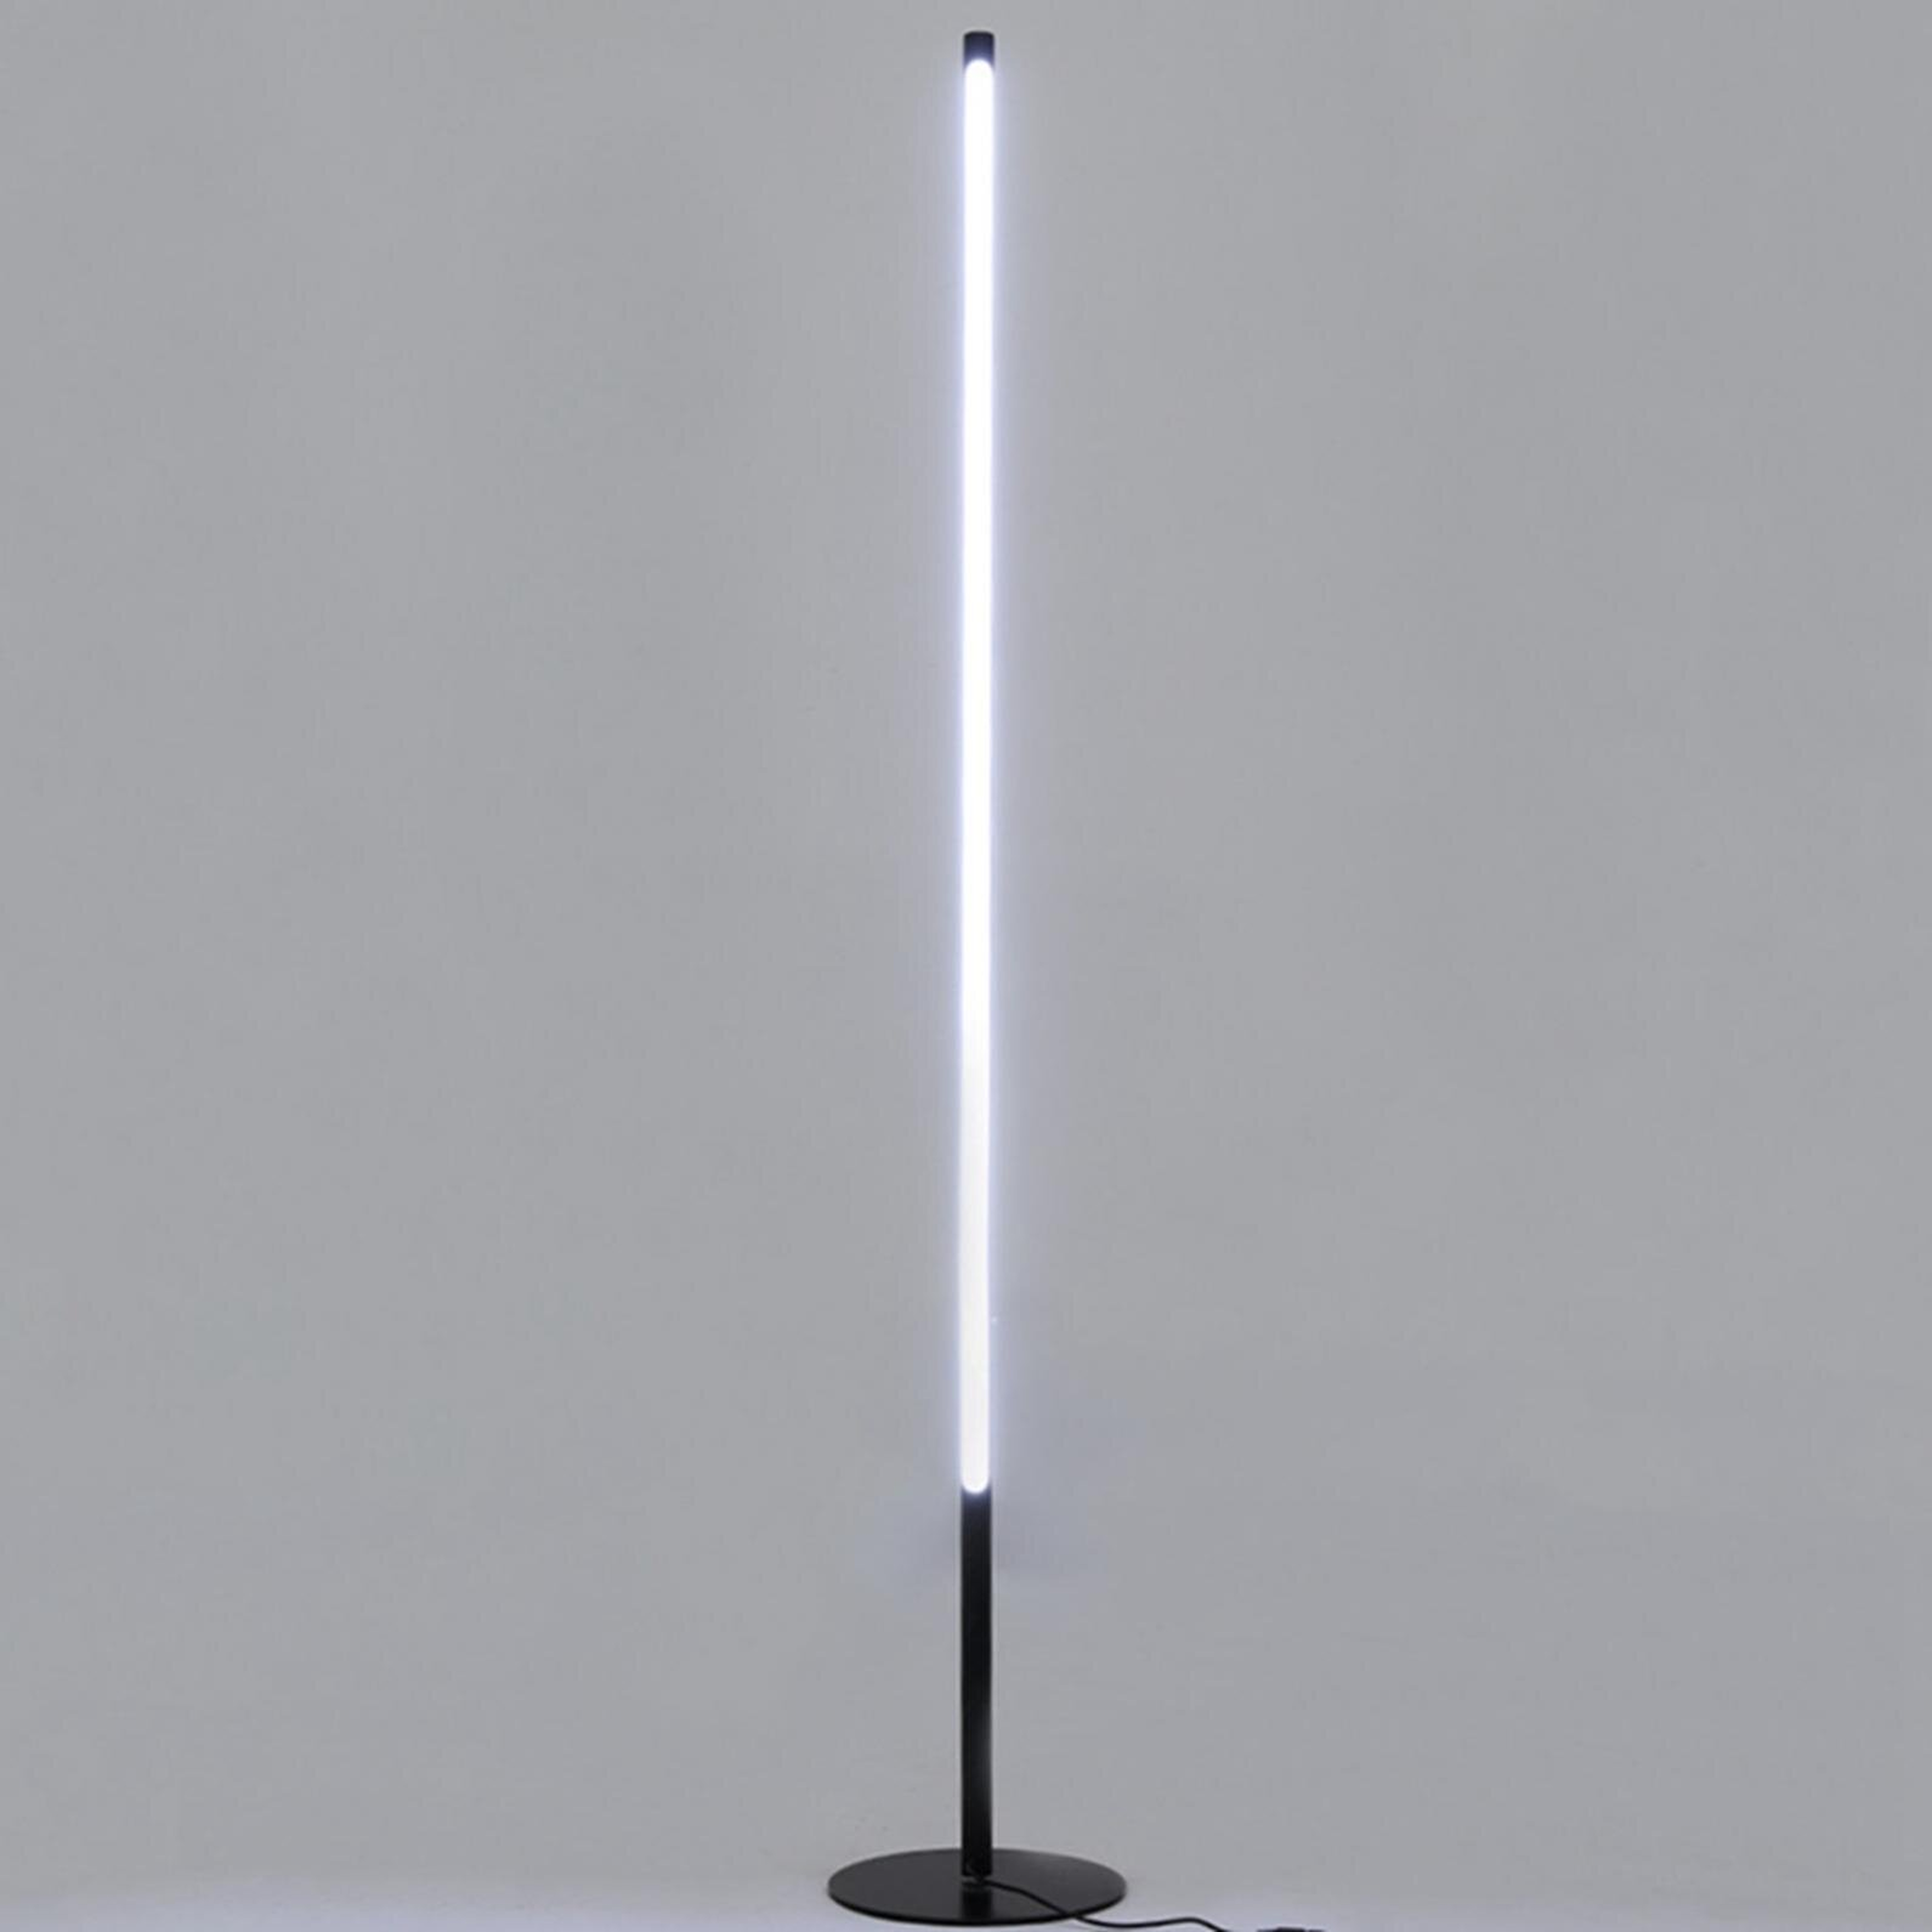 Dimmable LED Floor Lamp With Remote Control Switch - Wayfair